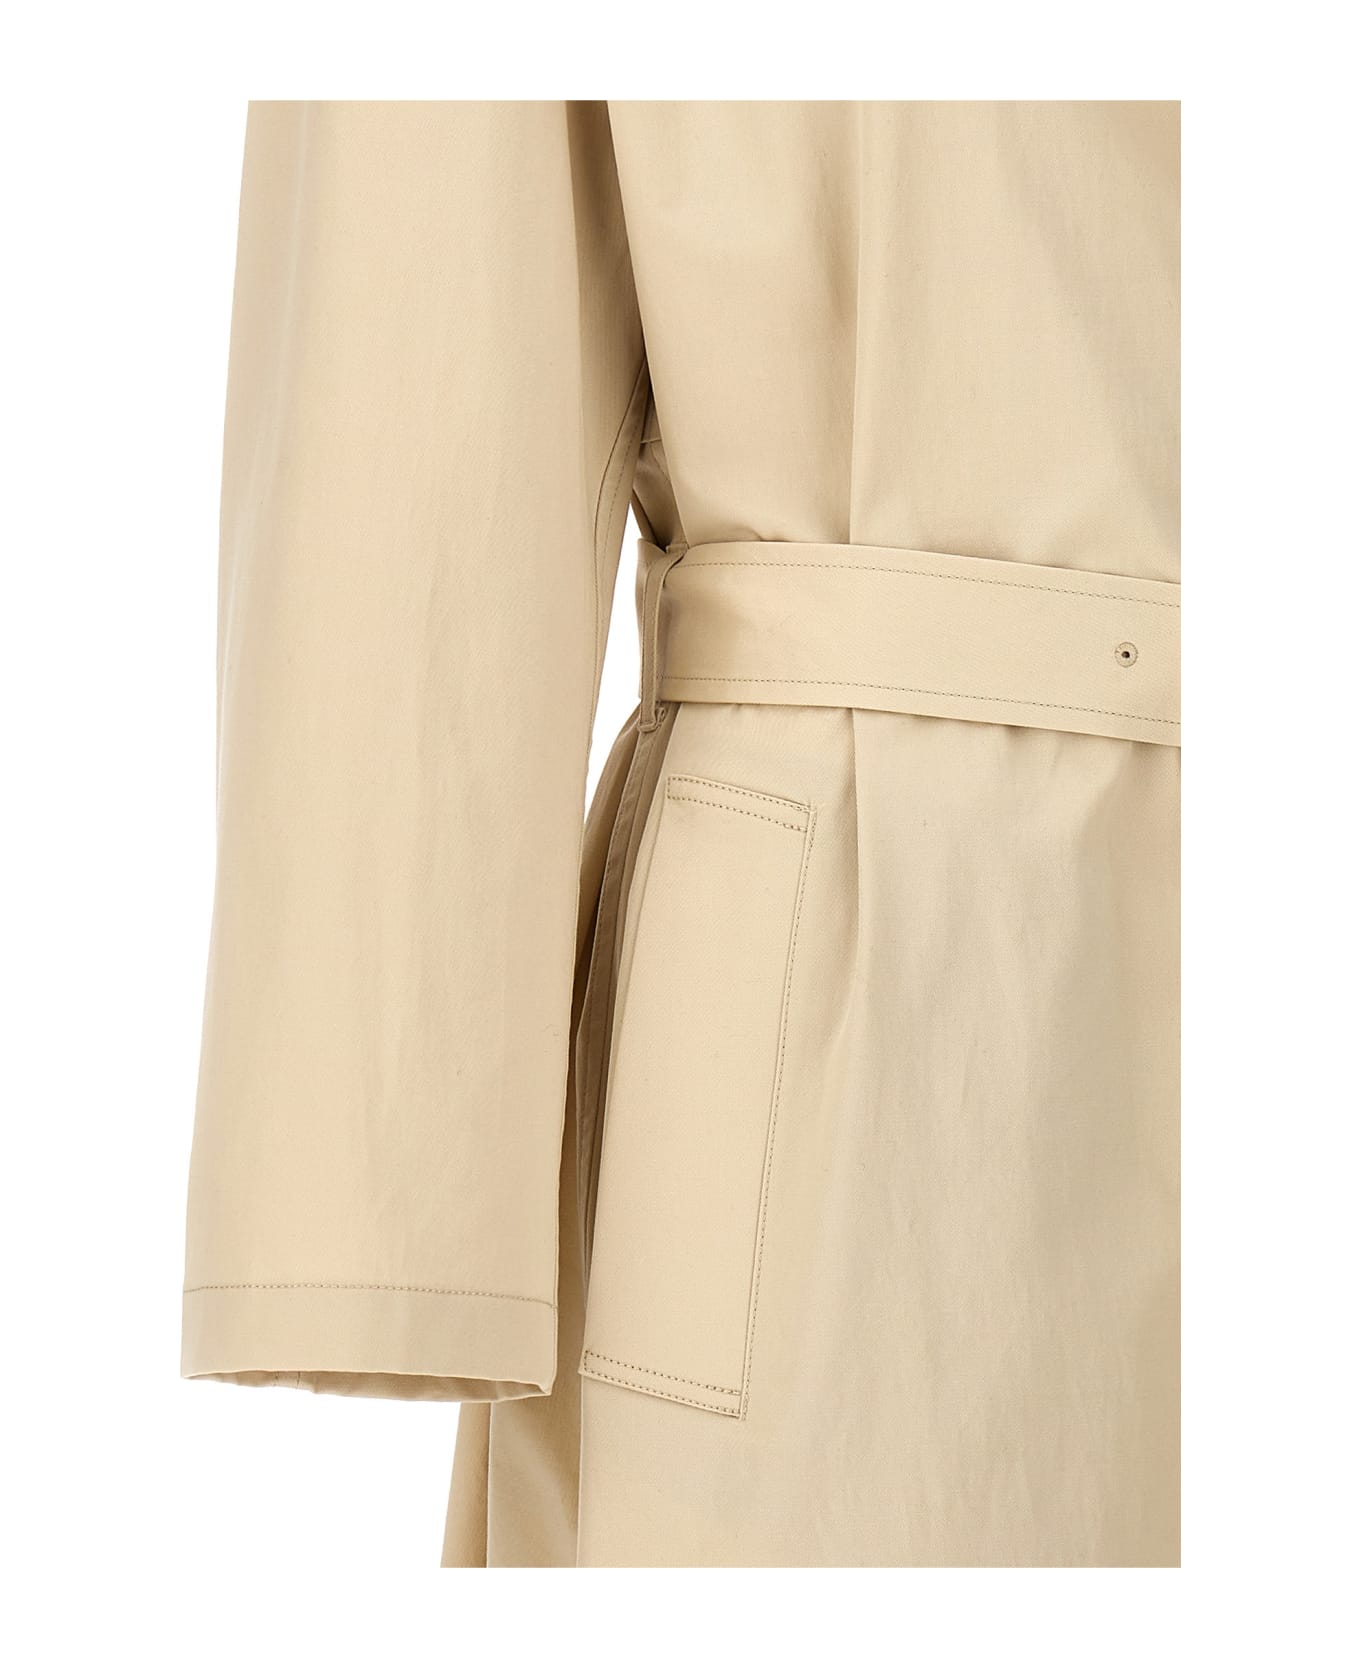 Theory Long Trench Coat - Sand